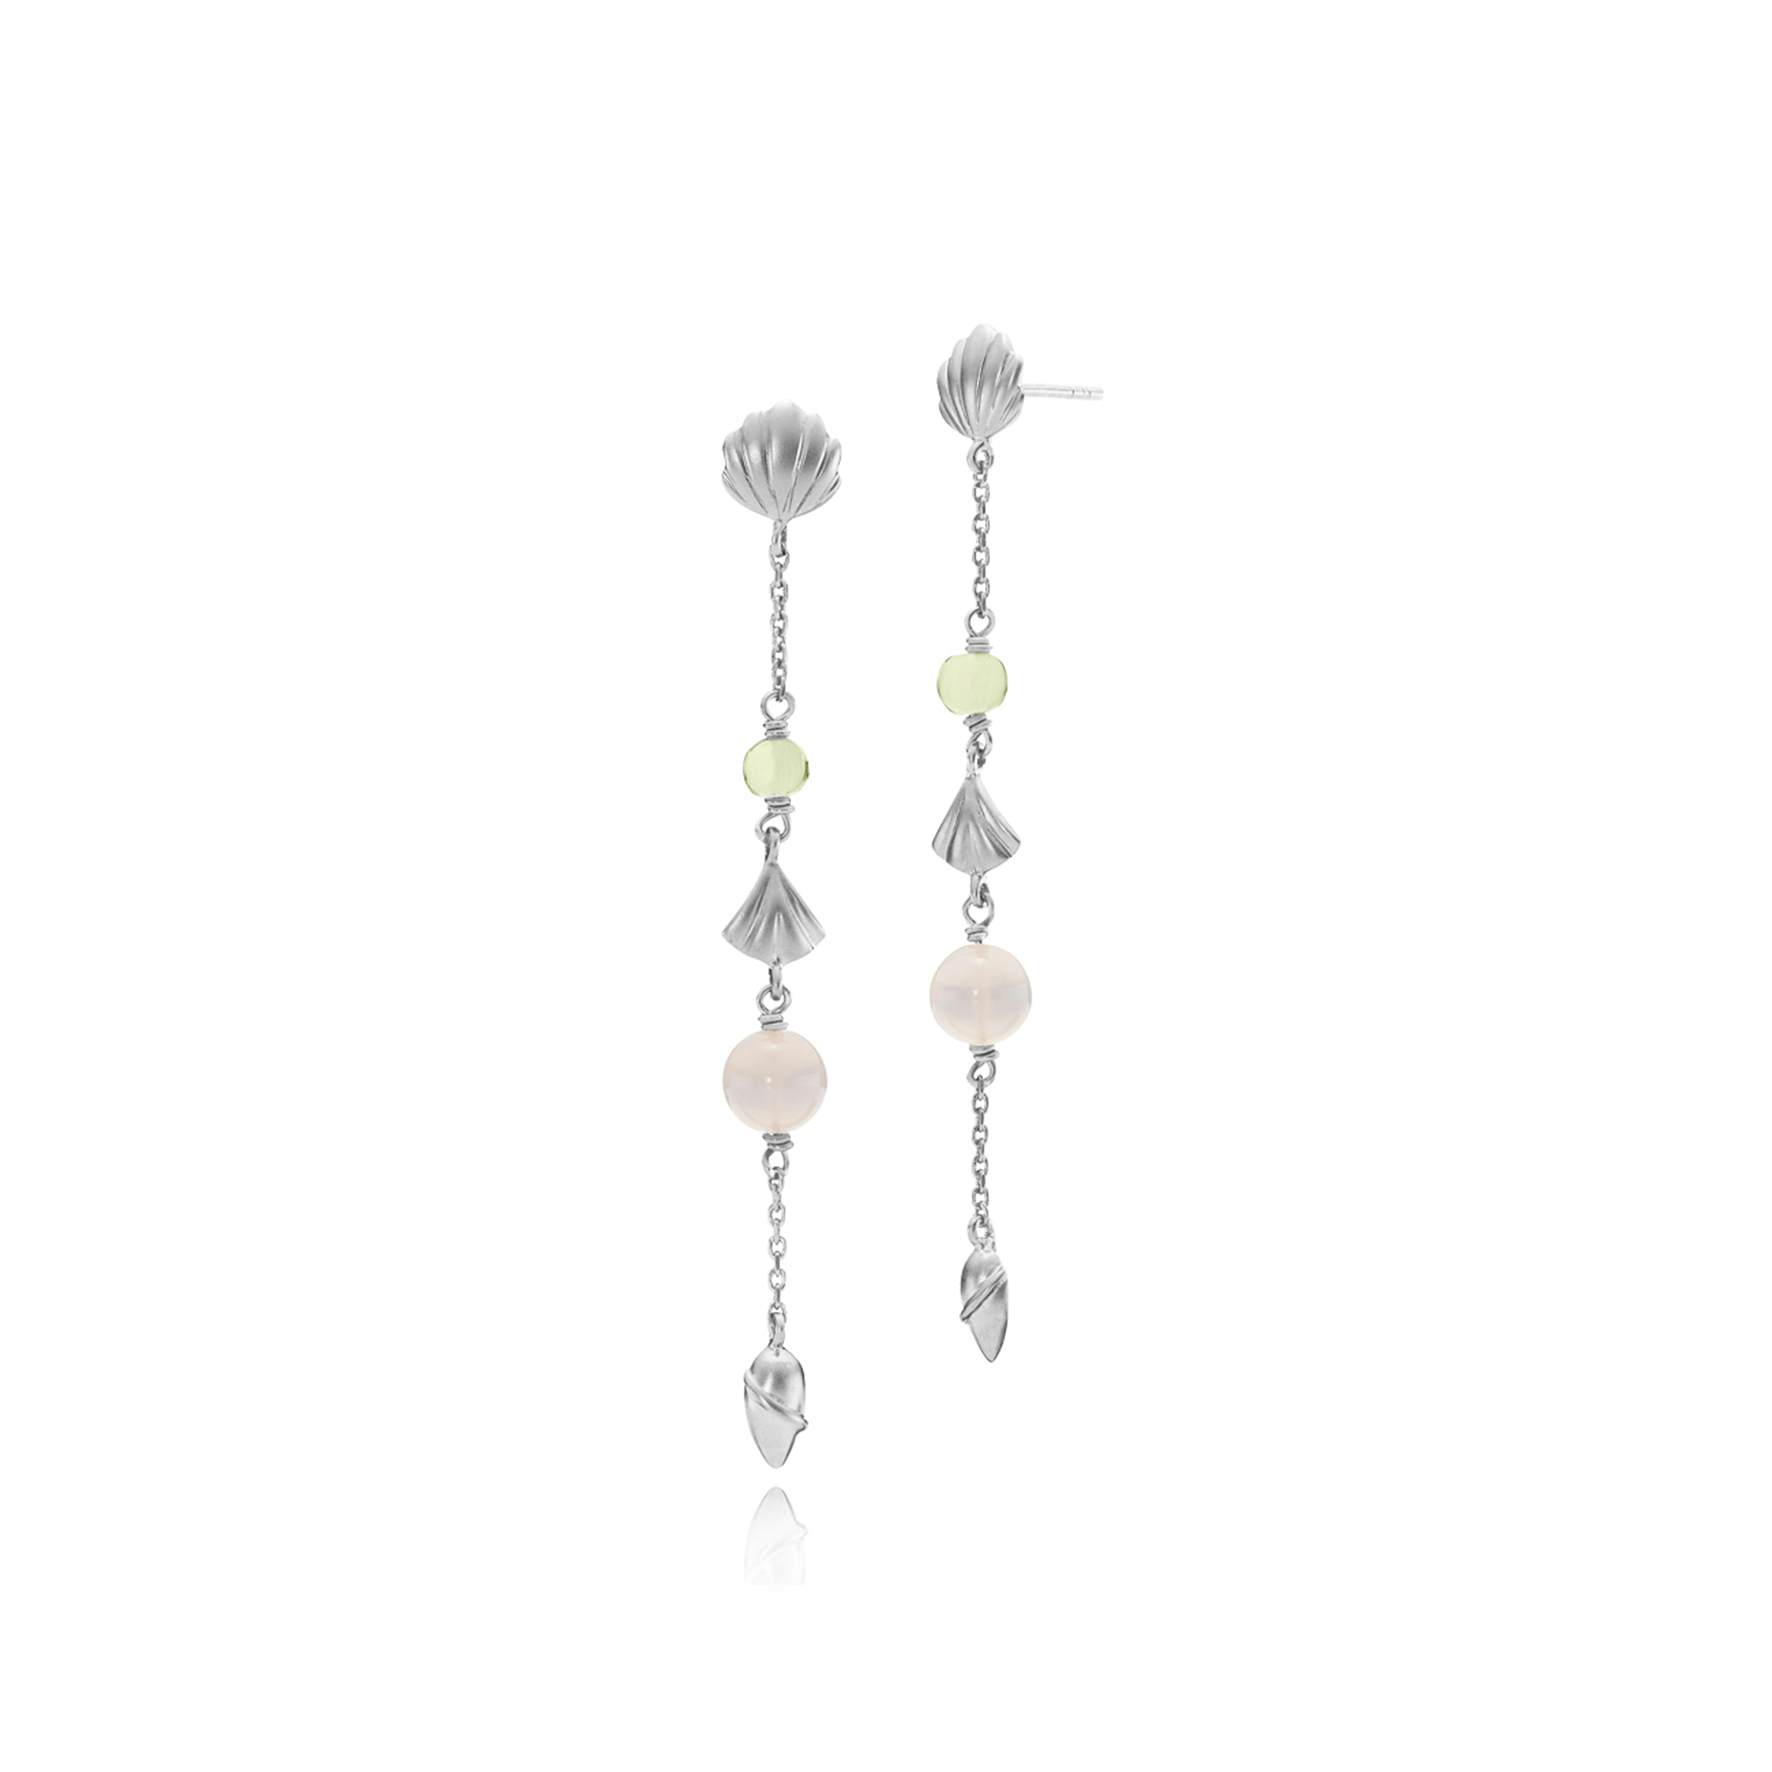 Isabella Pink/Green Long Earrings von Izabel Camille in Silber Sterling 925